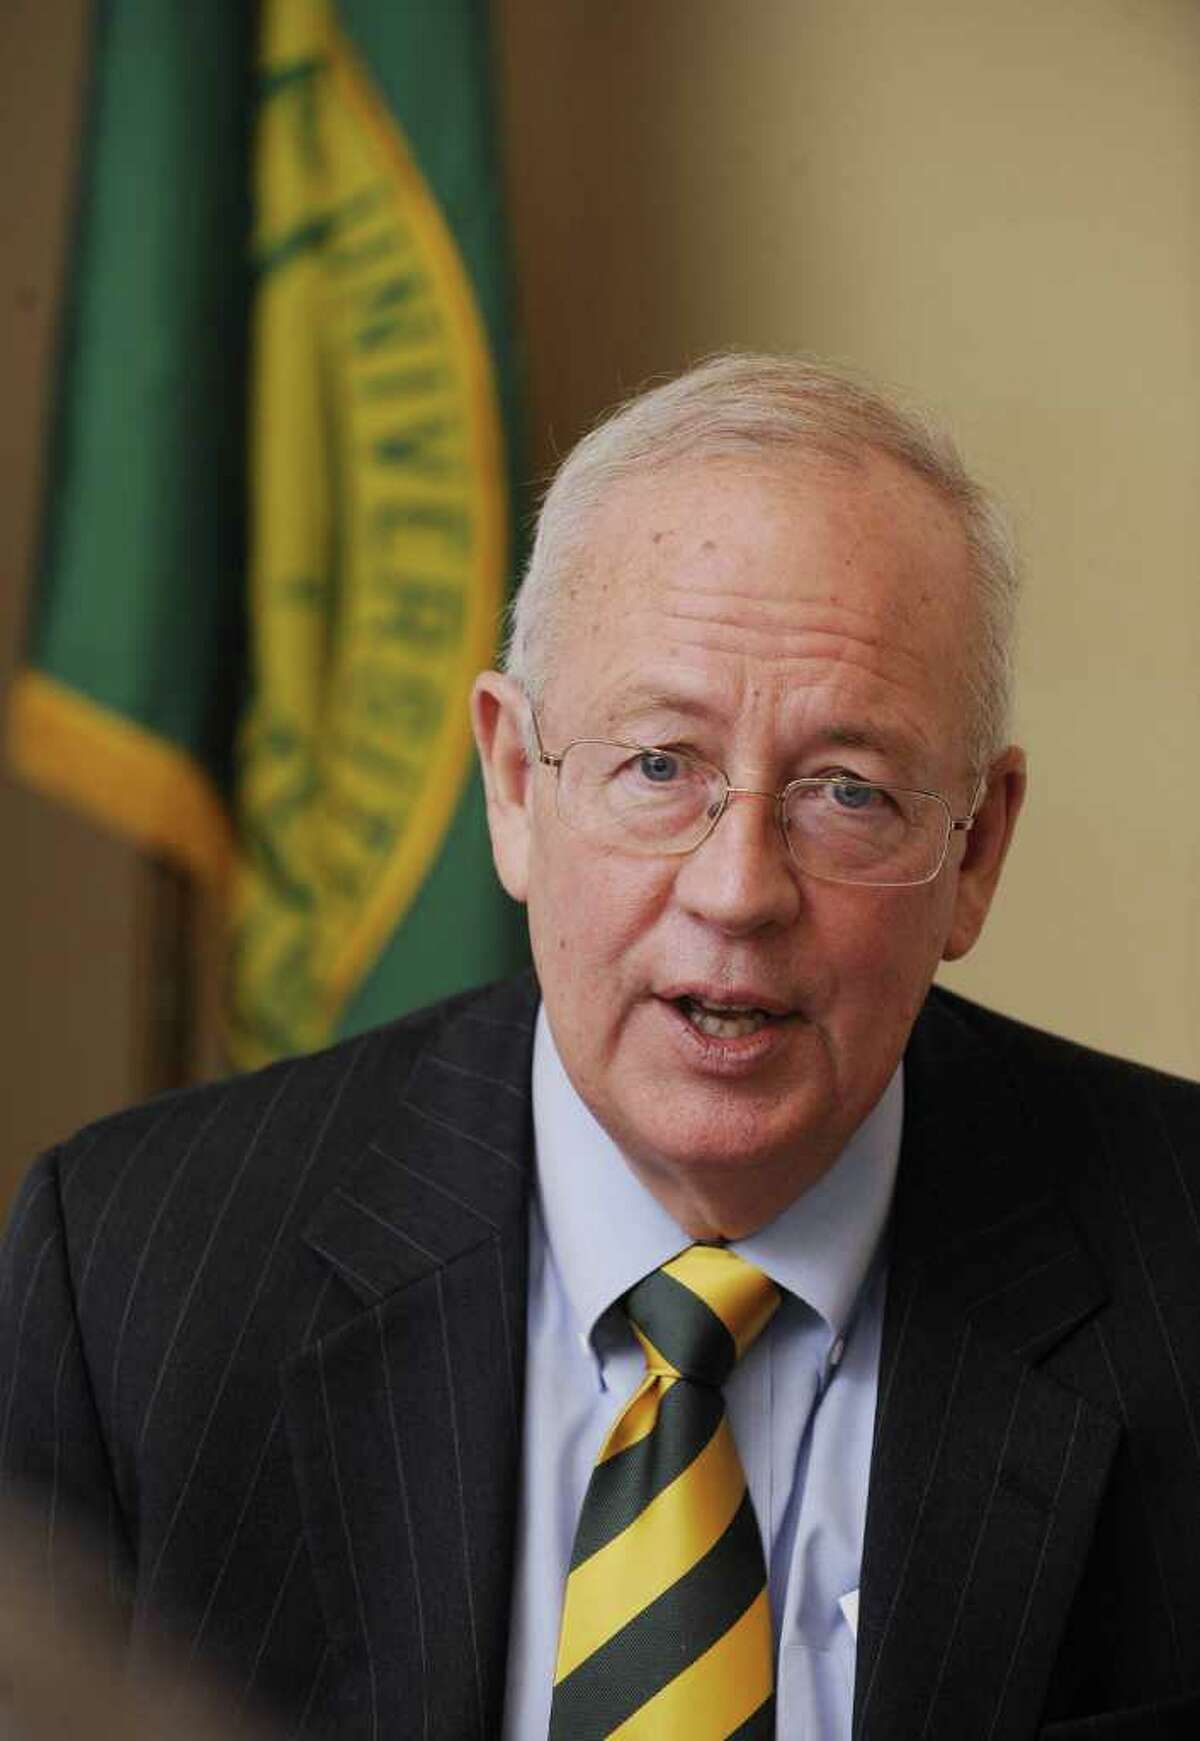 Kenneth Starr talks with reporters Monday, Feb. 15, 2010 in Waco Texas. Tthe former independent counsel whose work led to the impeachment of President Bill Clinton, was named president of Baylor University. Starr, 63, is the dean of Pepperdine University’s School of Law in Malibu, Calif., and will become Baylor’s 14th president.